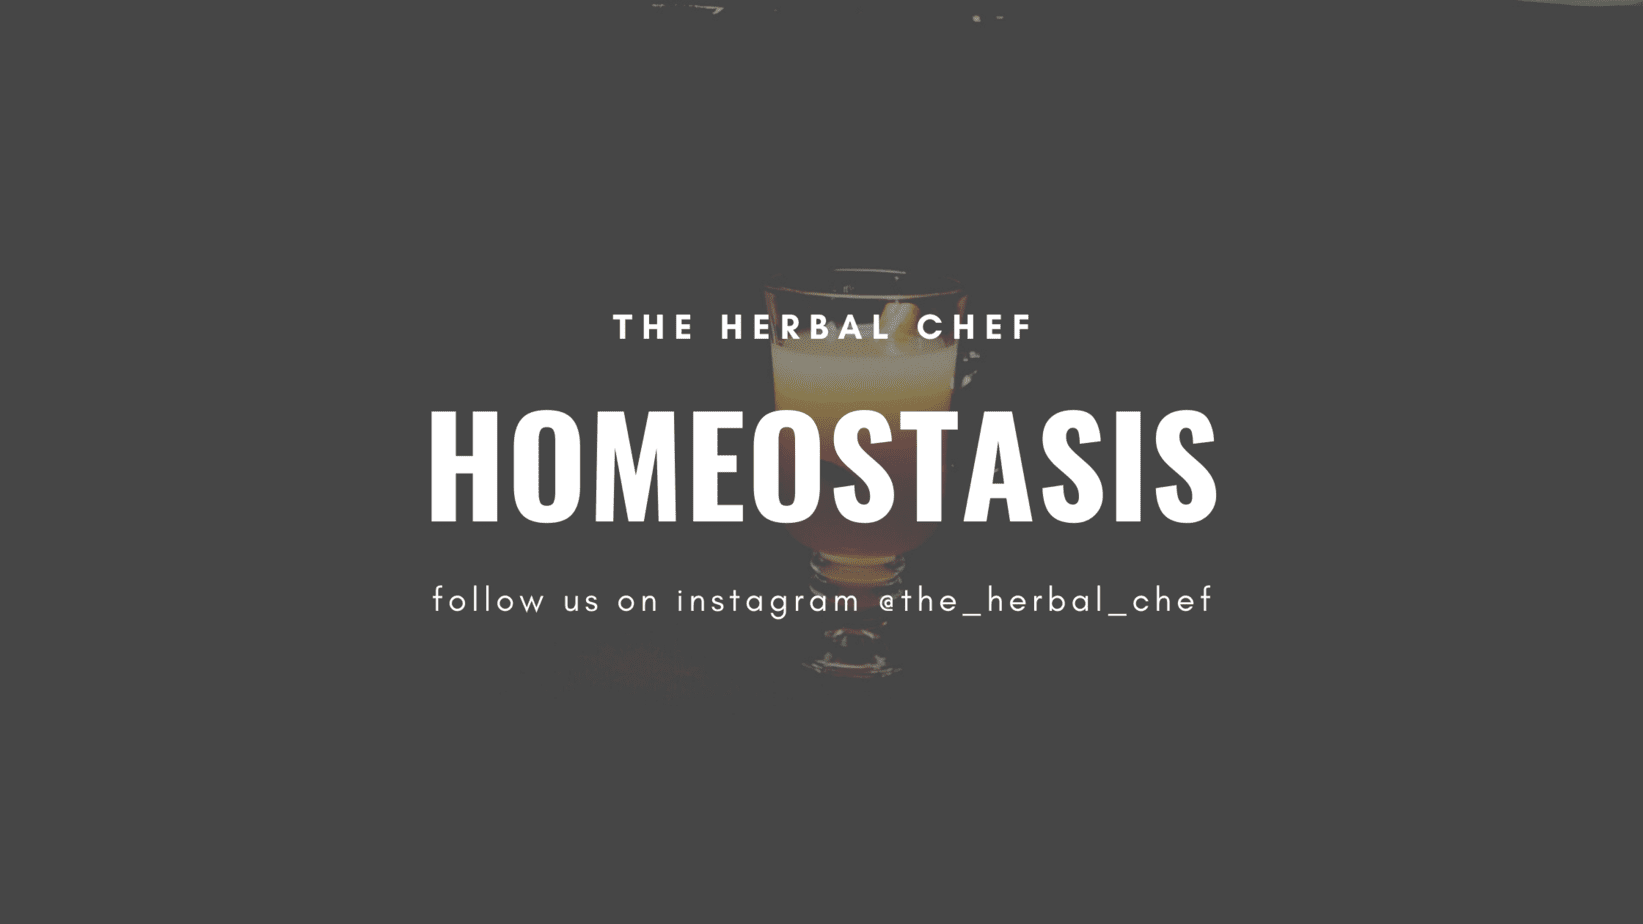 What Is Homeostasis?